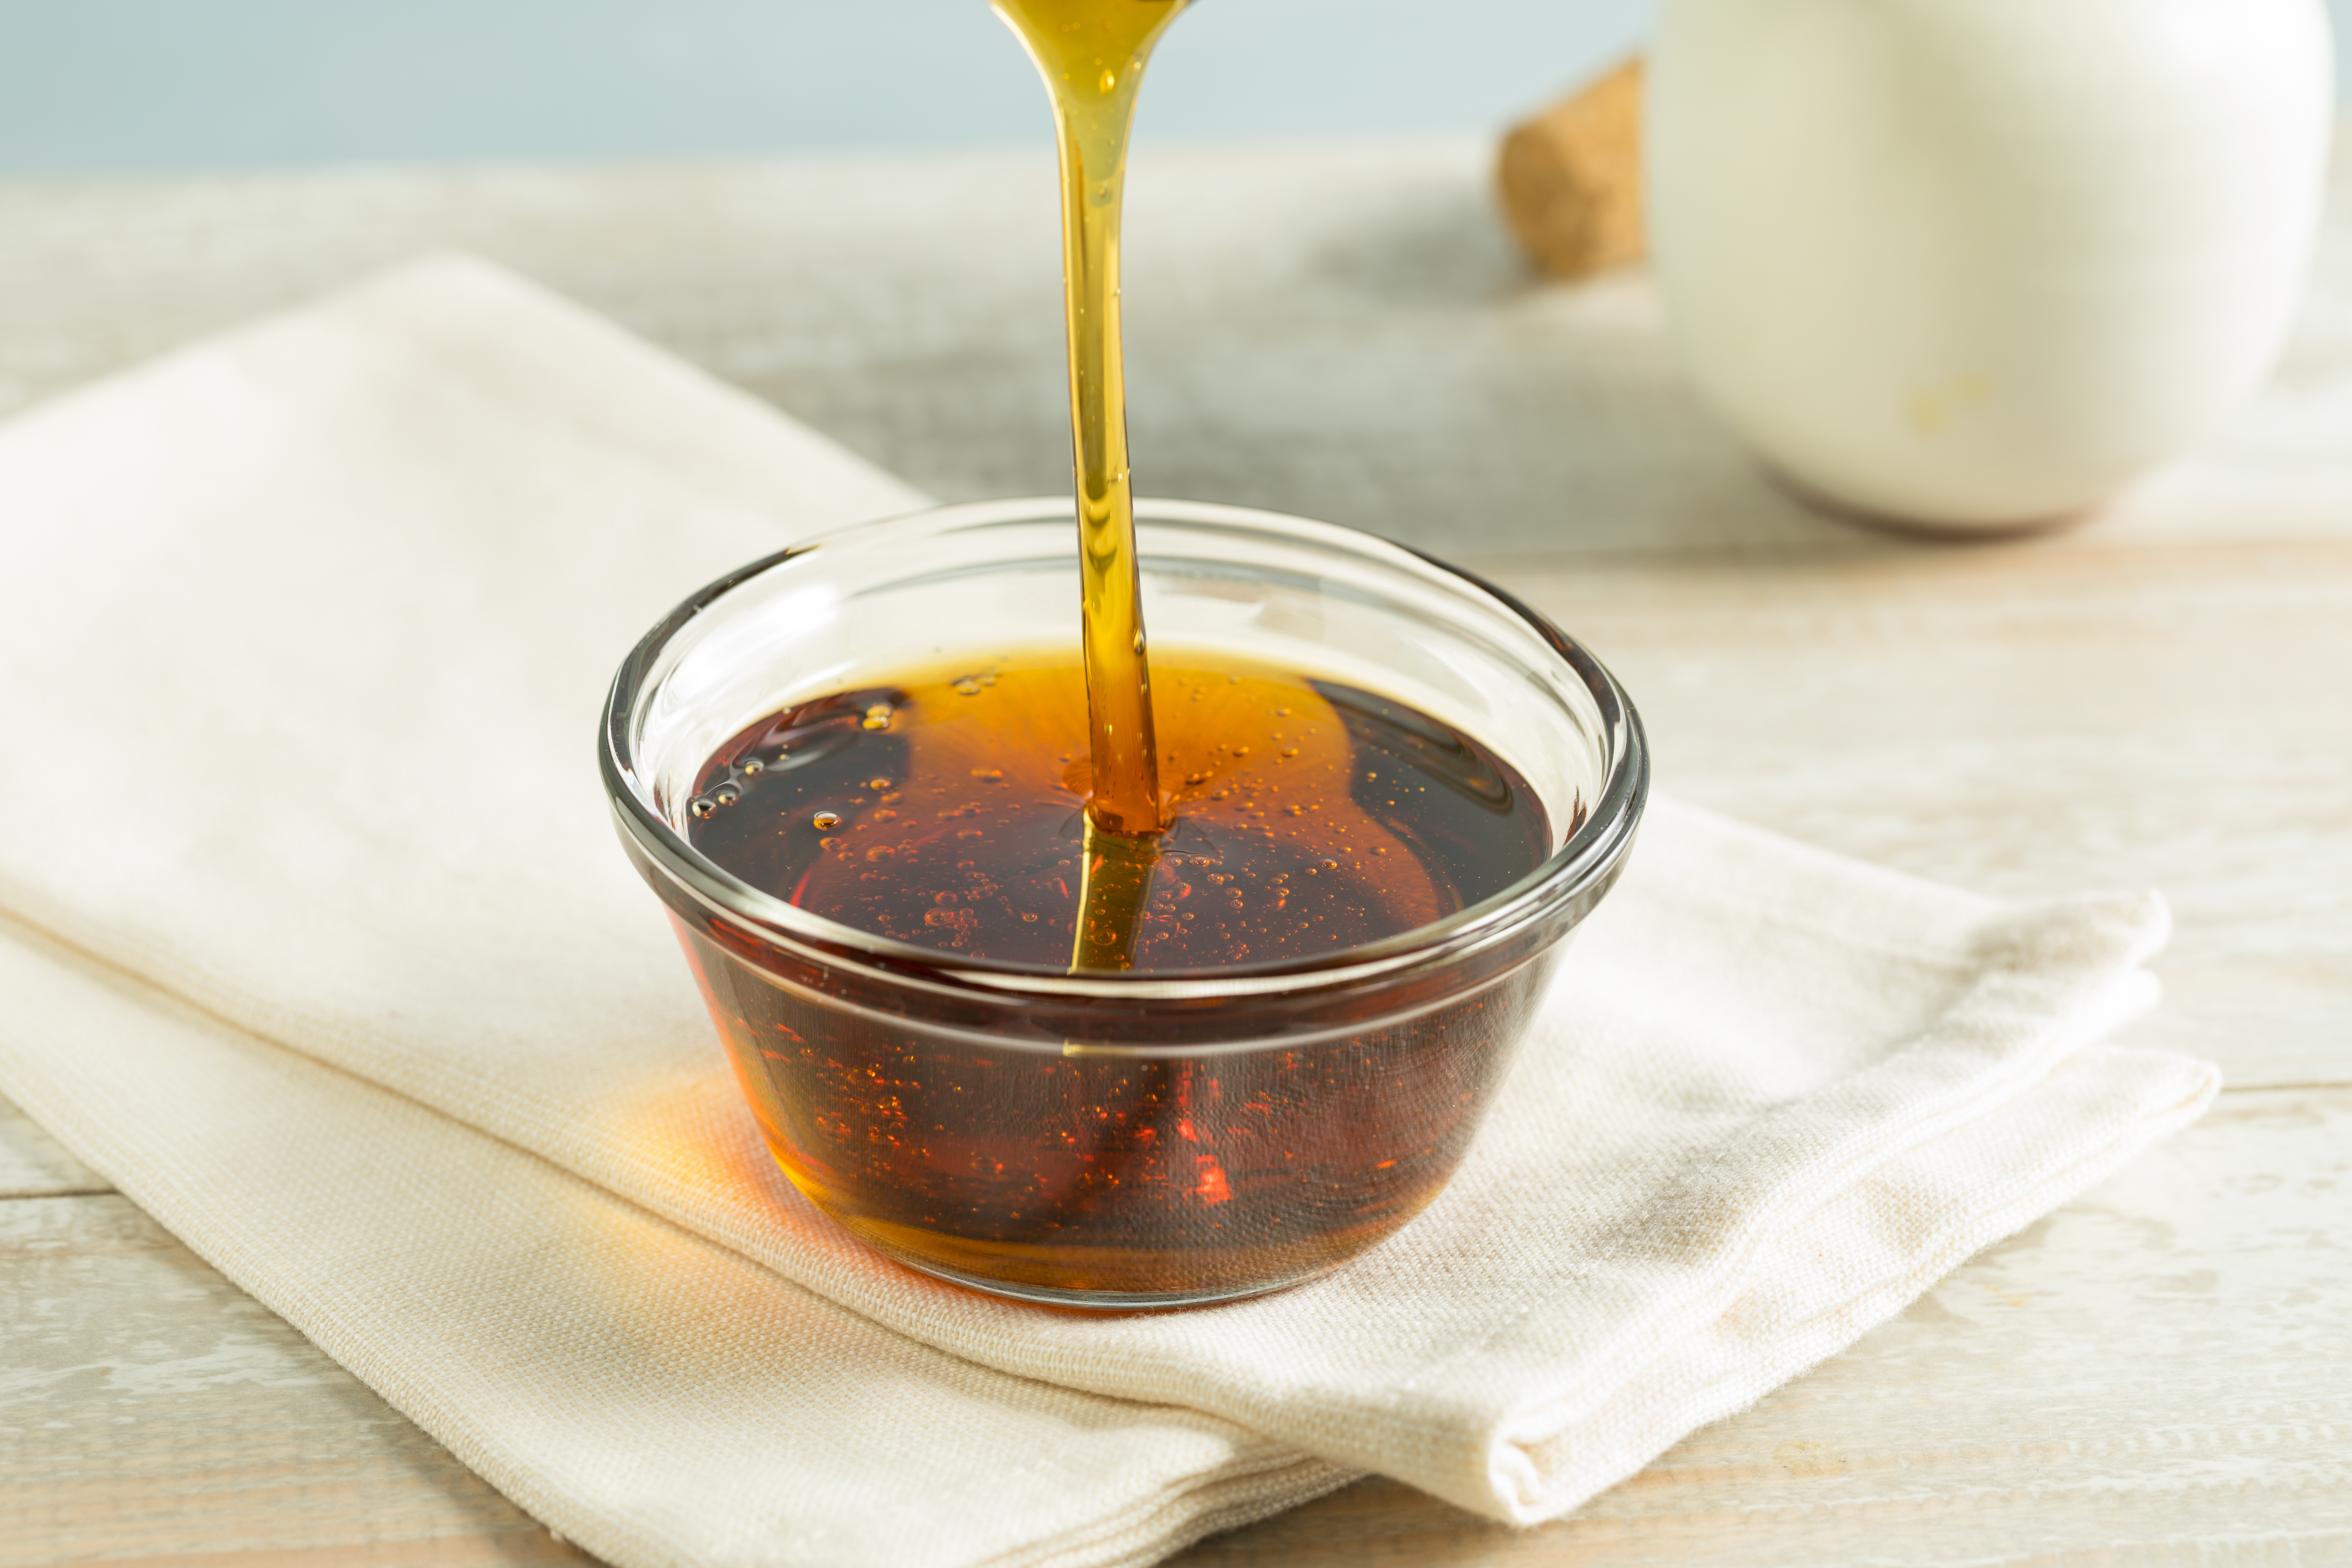 Agave syrup | Source: shutterstock